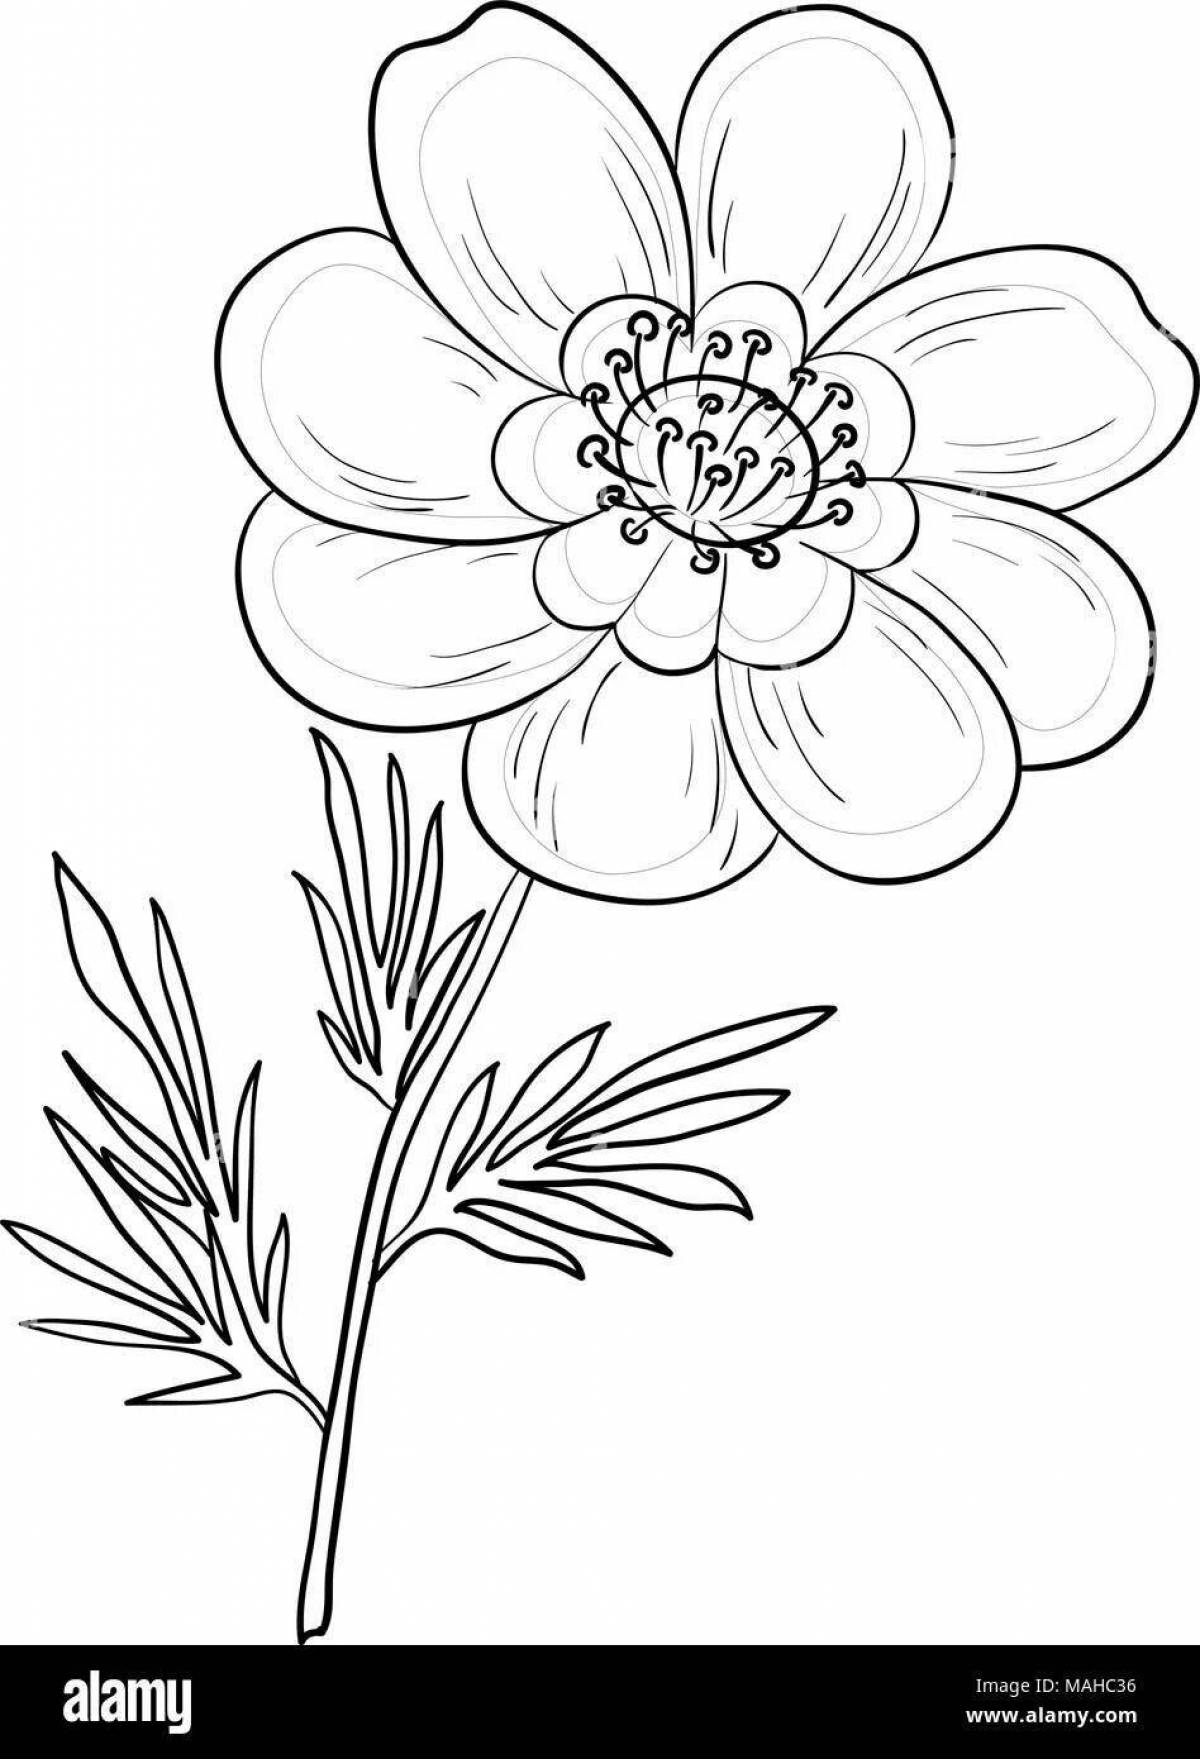 Coloring page charming flower lasorica